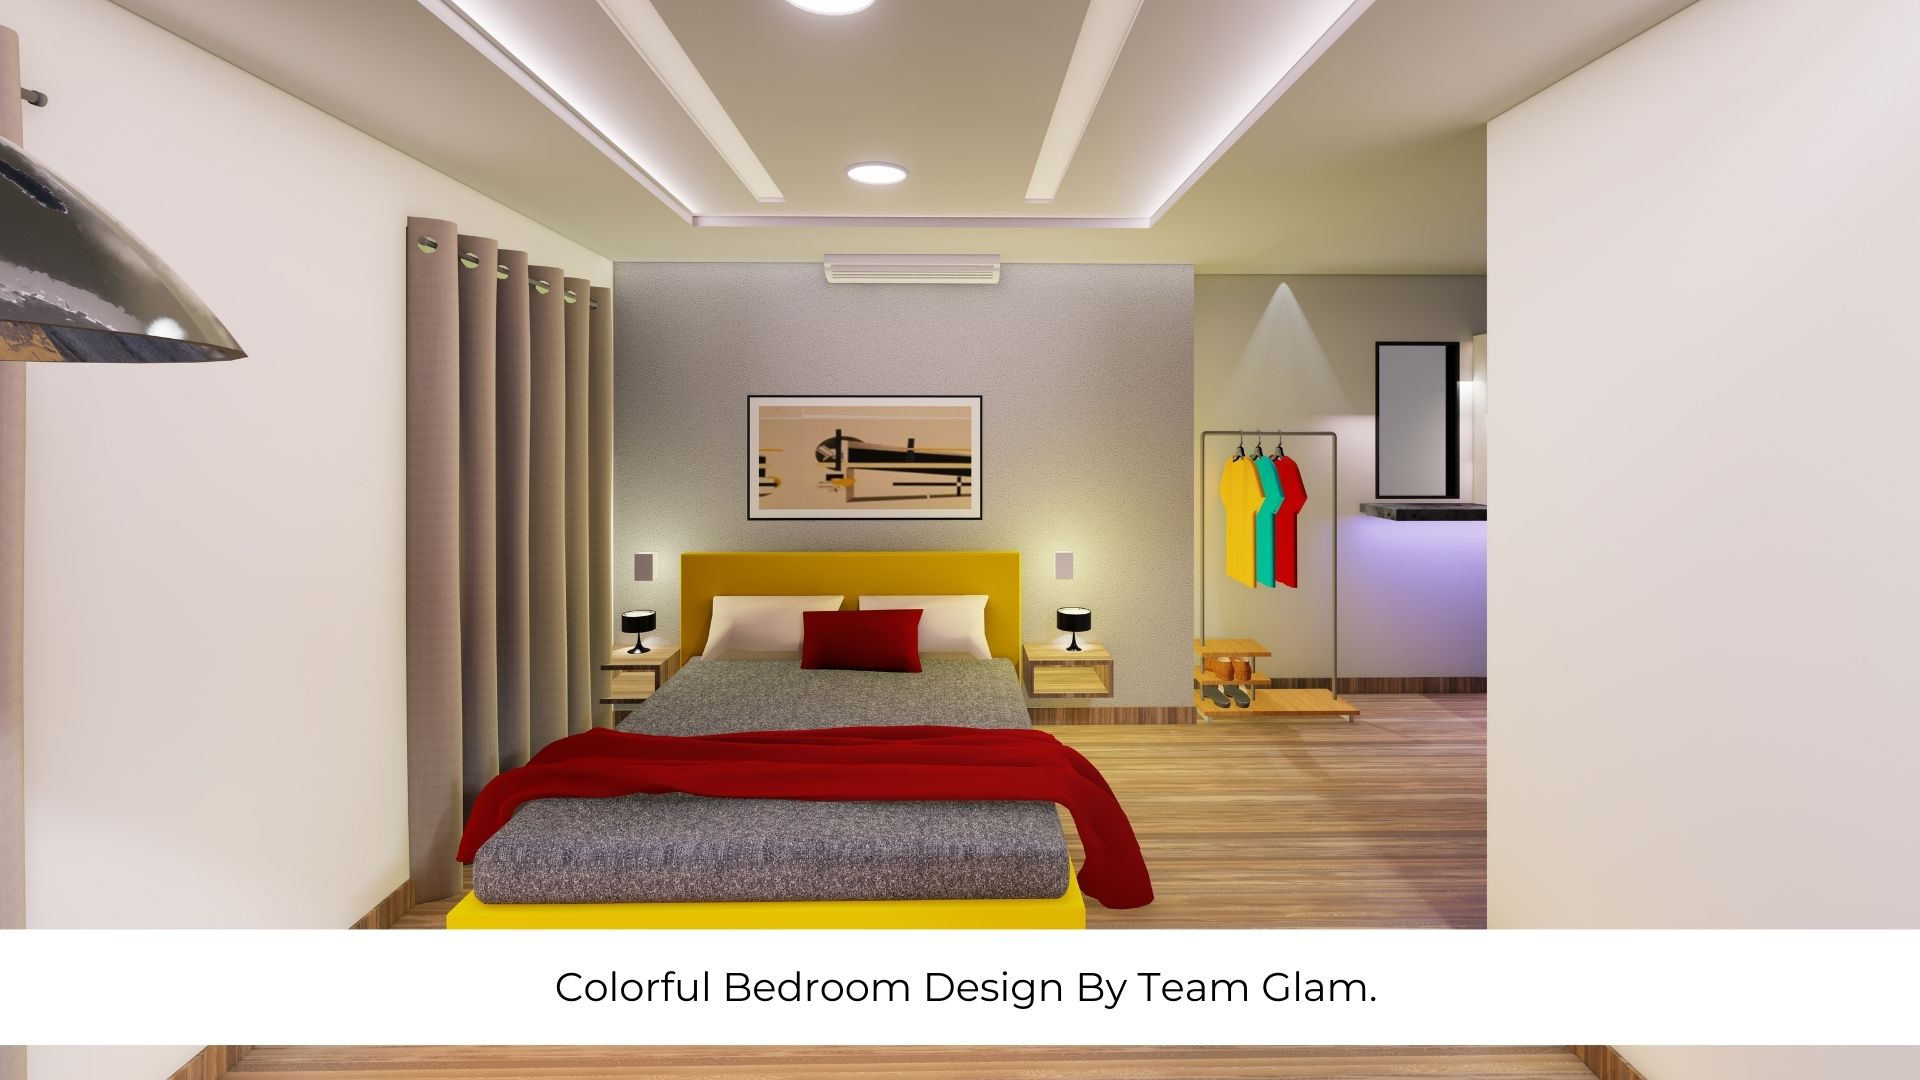 Colorful Bedroom Design By Team Glam.